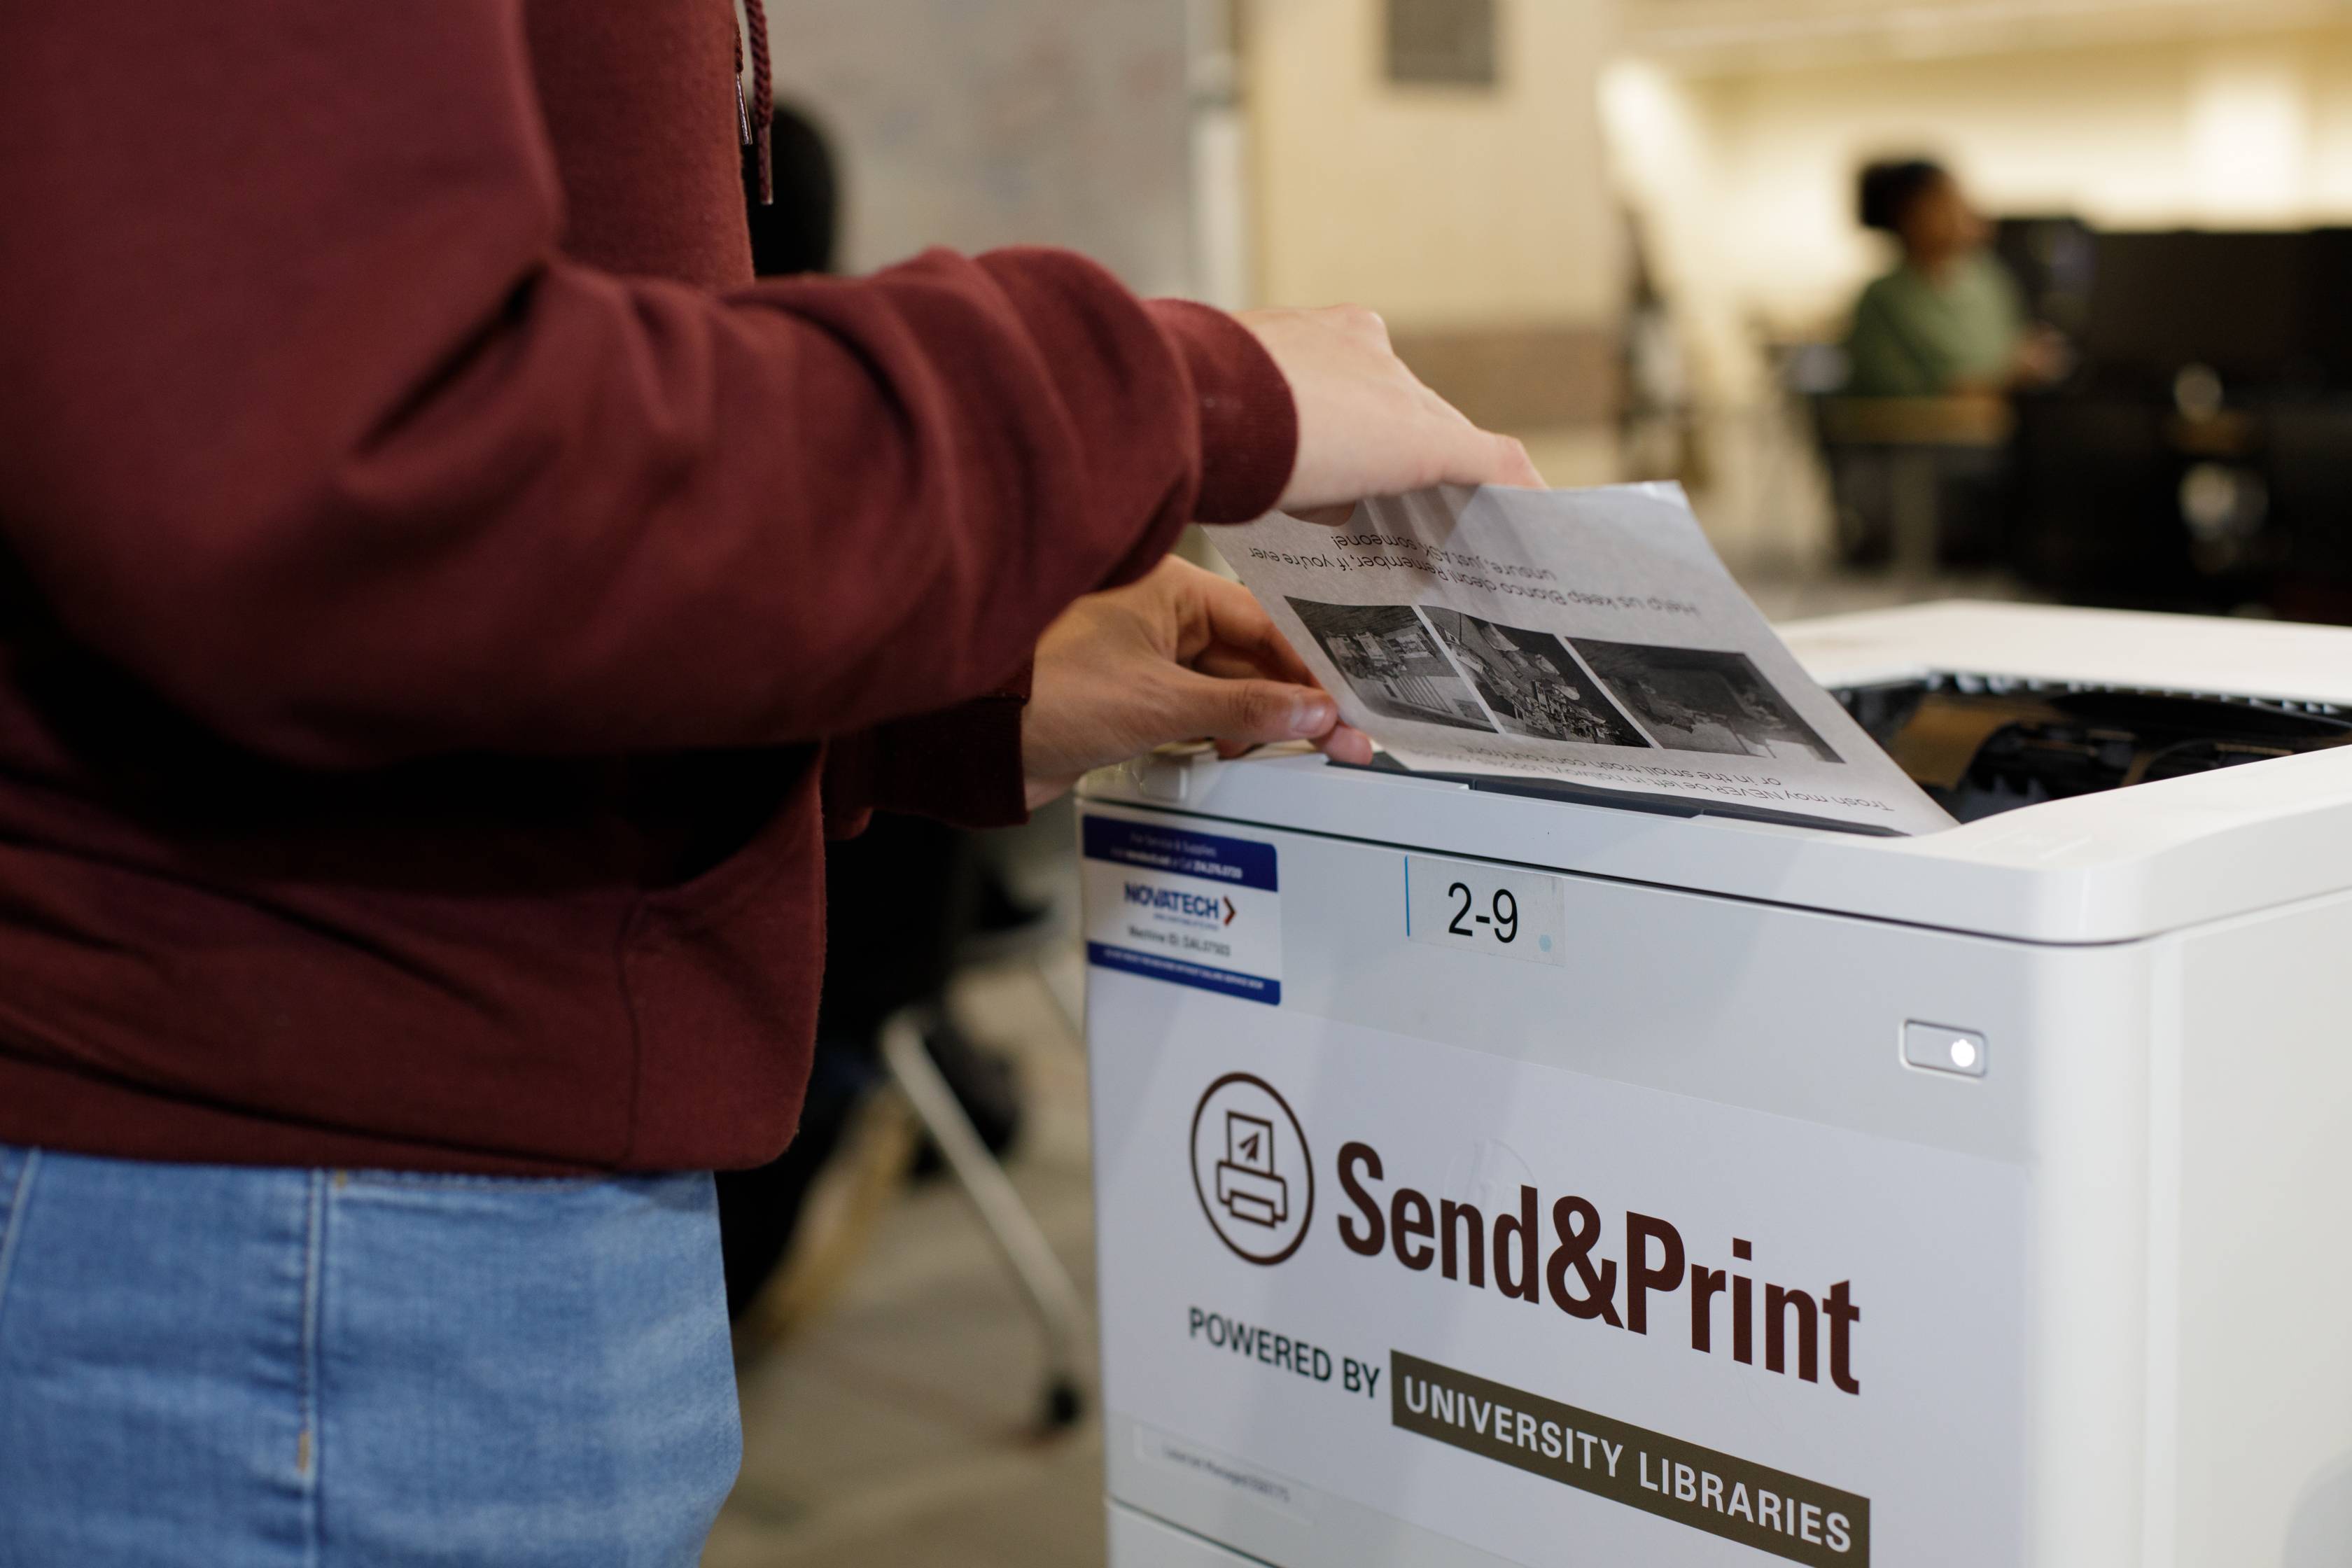 Student printing a document